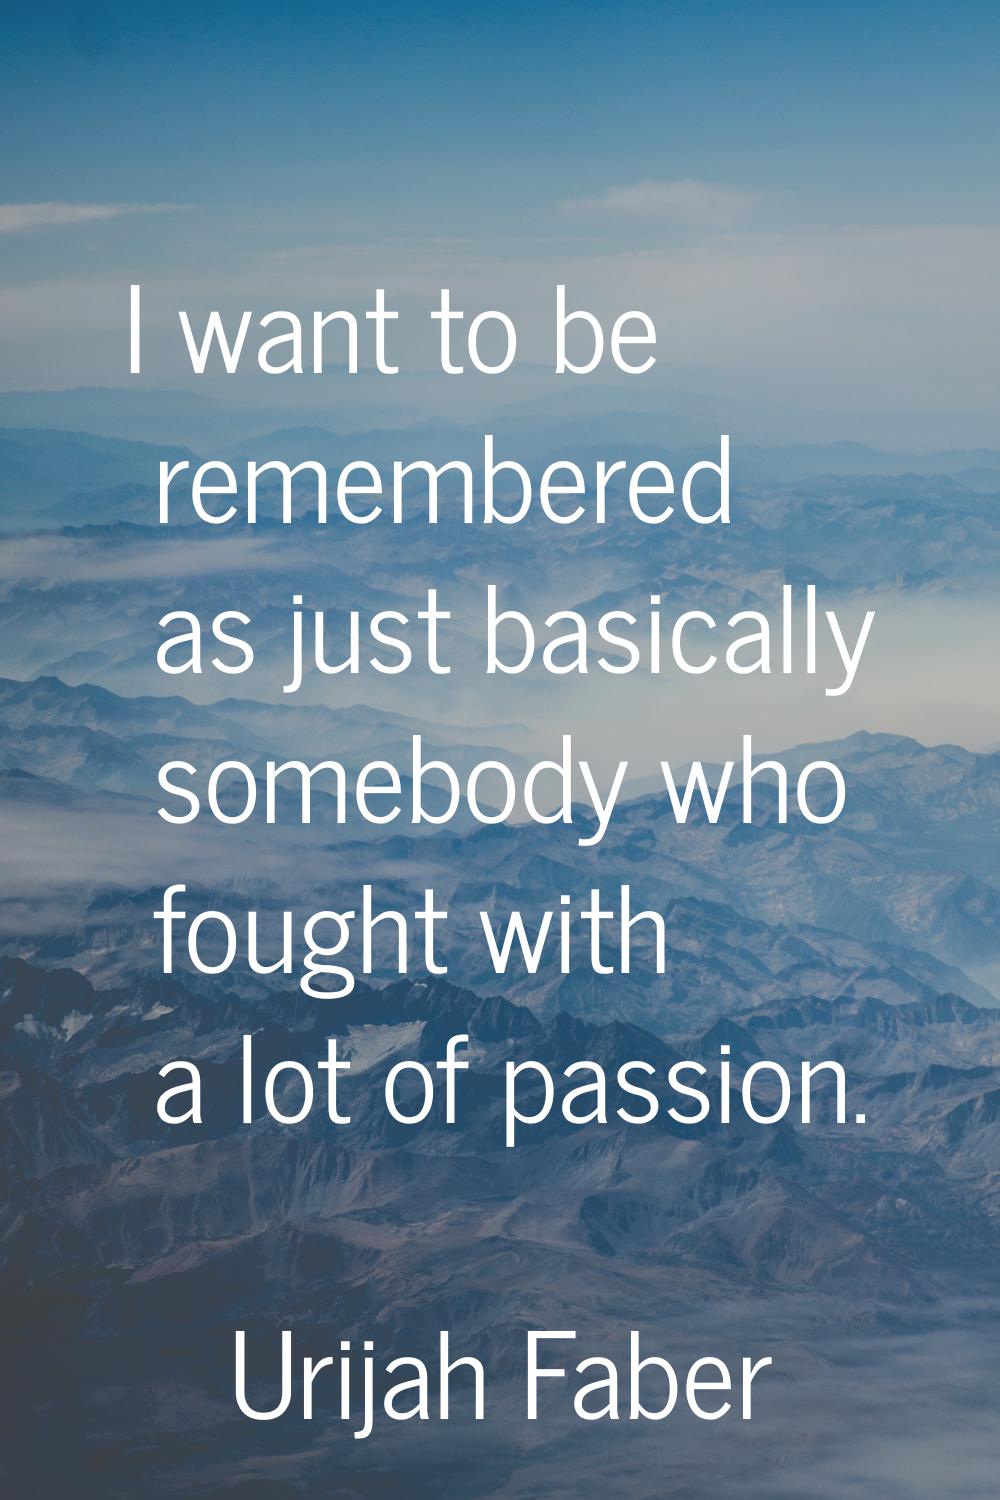 I want to be remembered as just basically somebody who fought with a lot of passion.